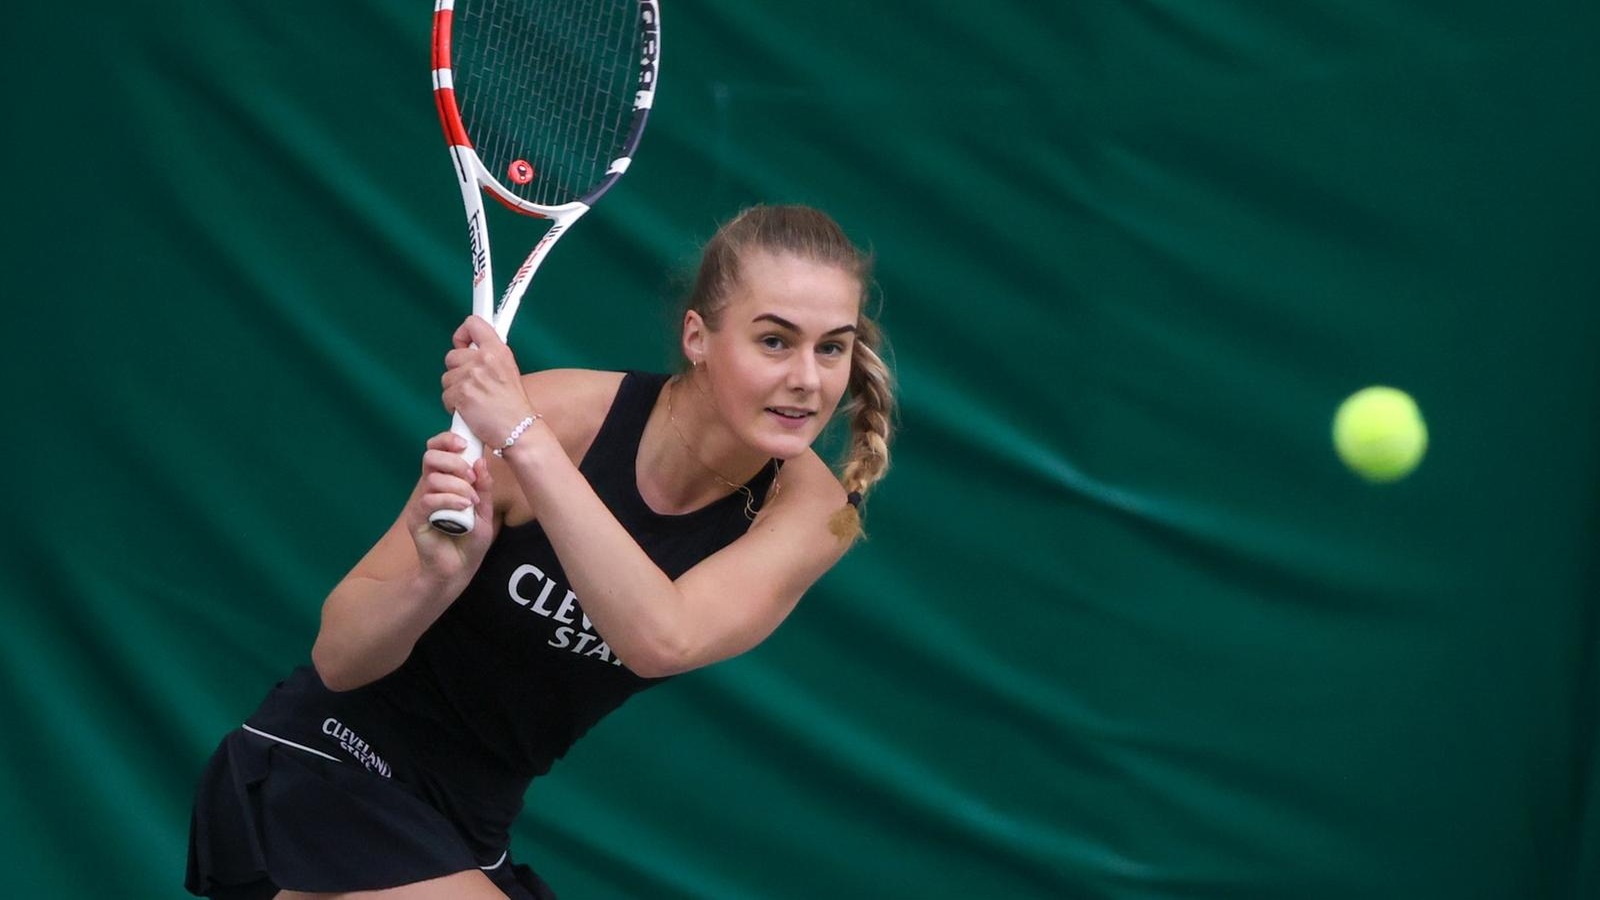 Cleveland State Women’s Tennis Earns Six Singles Wins On Day Two At Thunder In The Mountains